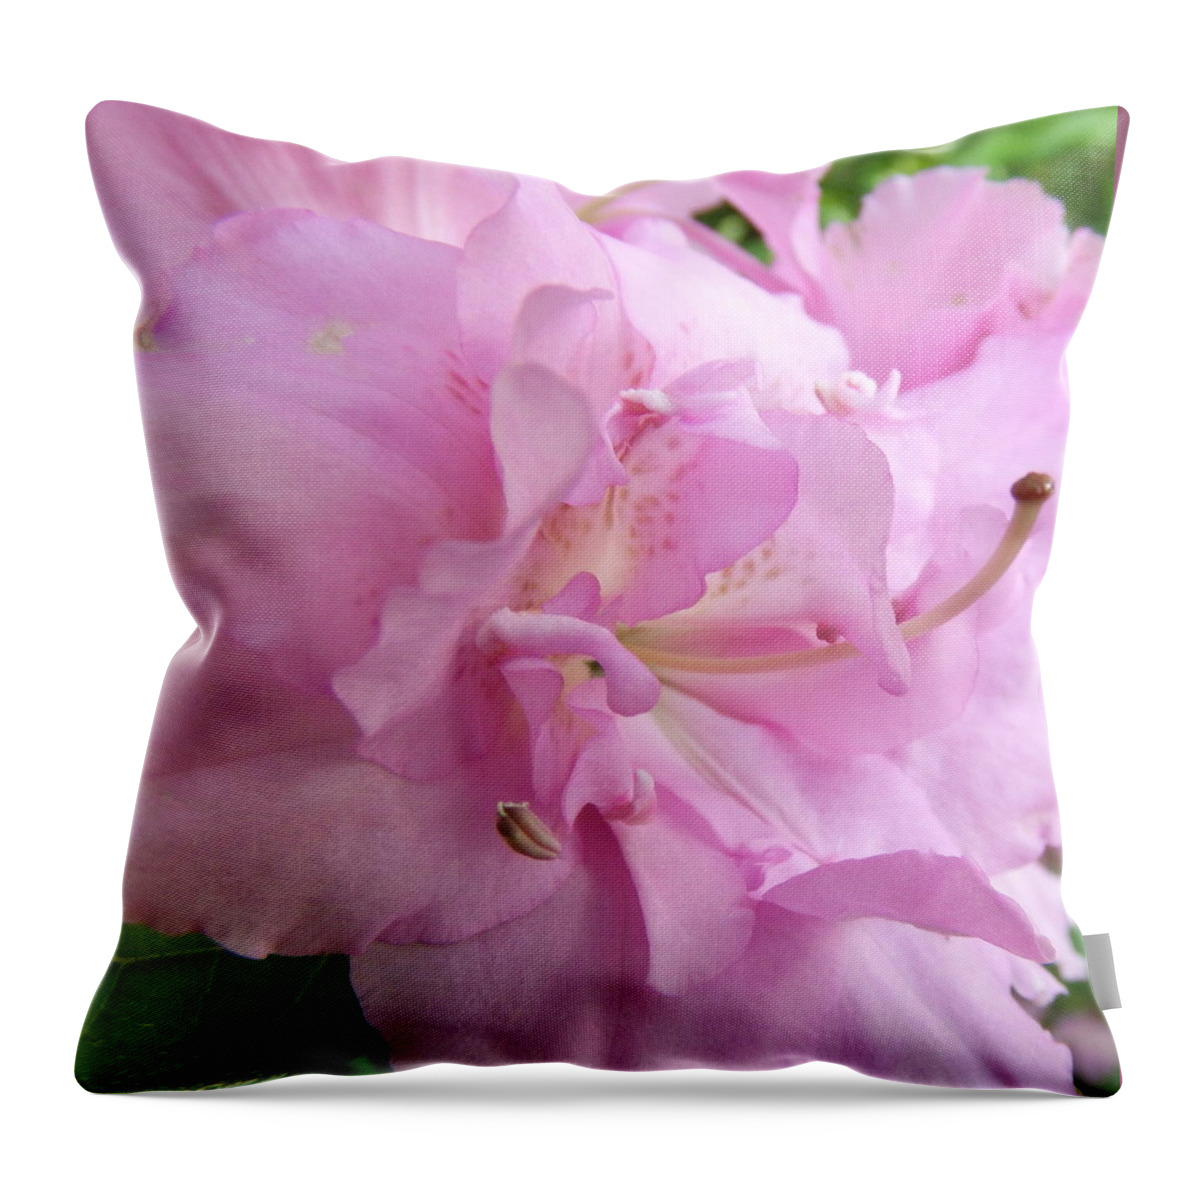 Flowers Throw Pillow featuring the photograph Azalea Close Up by Cathy Harper